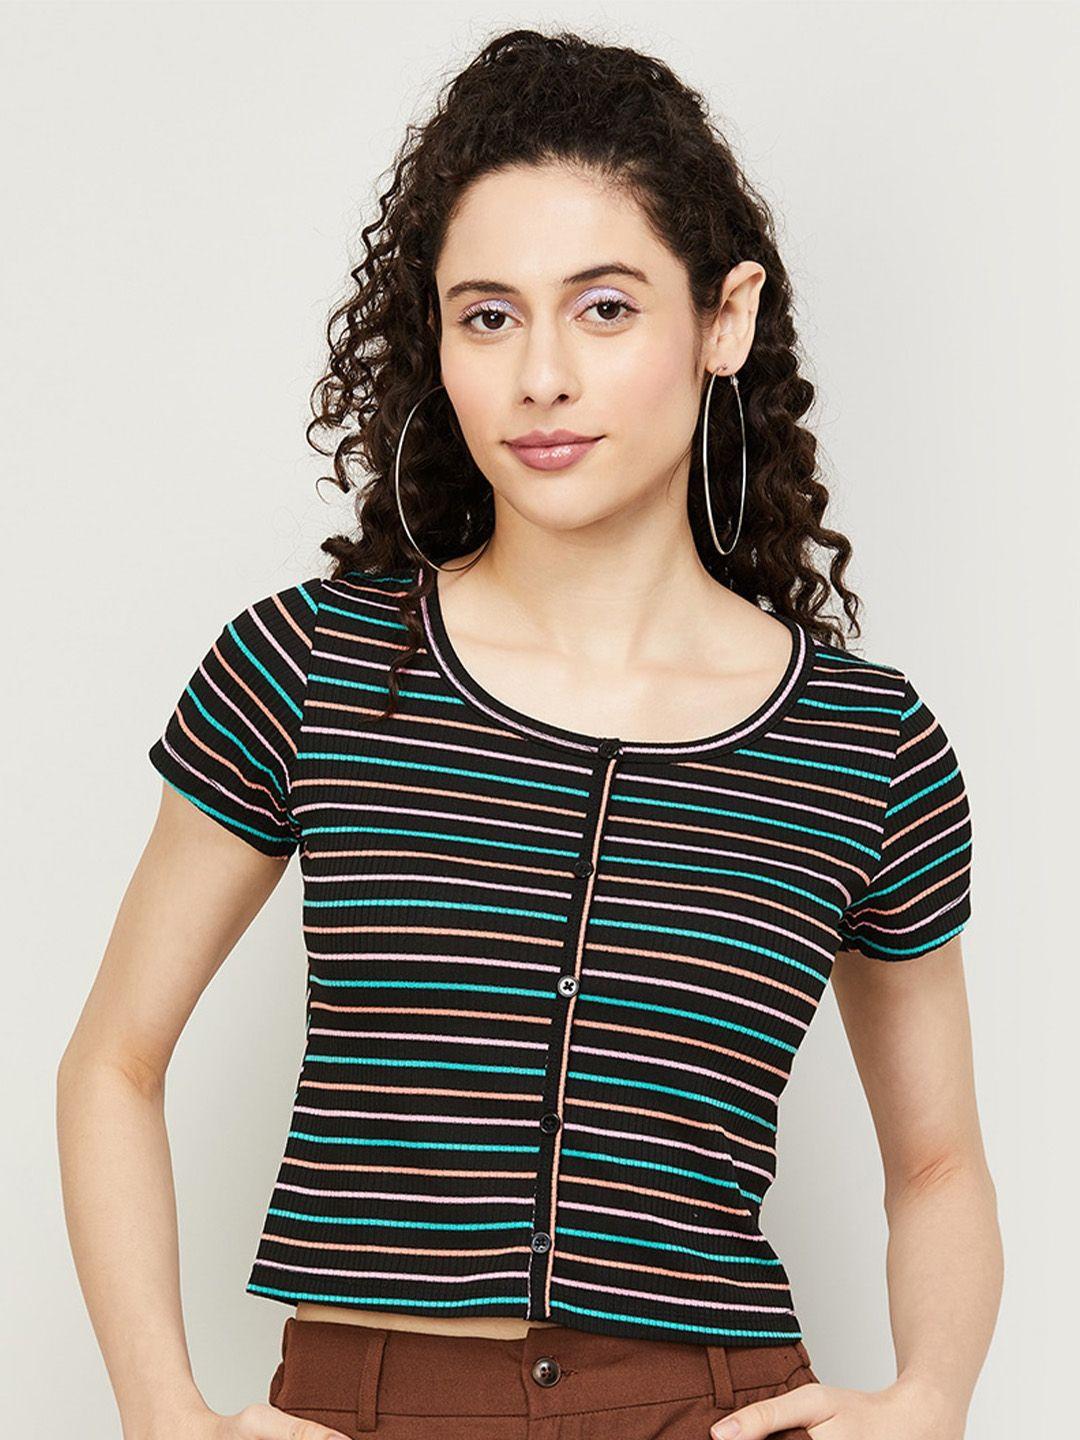 ginger by lifestyle horizontal striped crop shirt style top